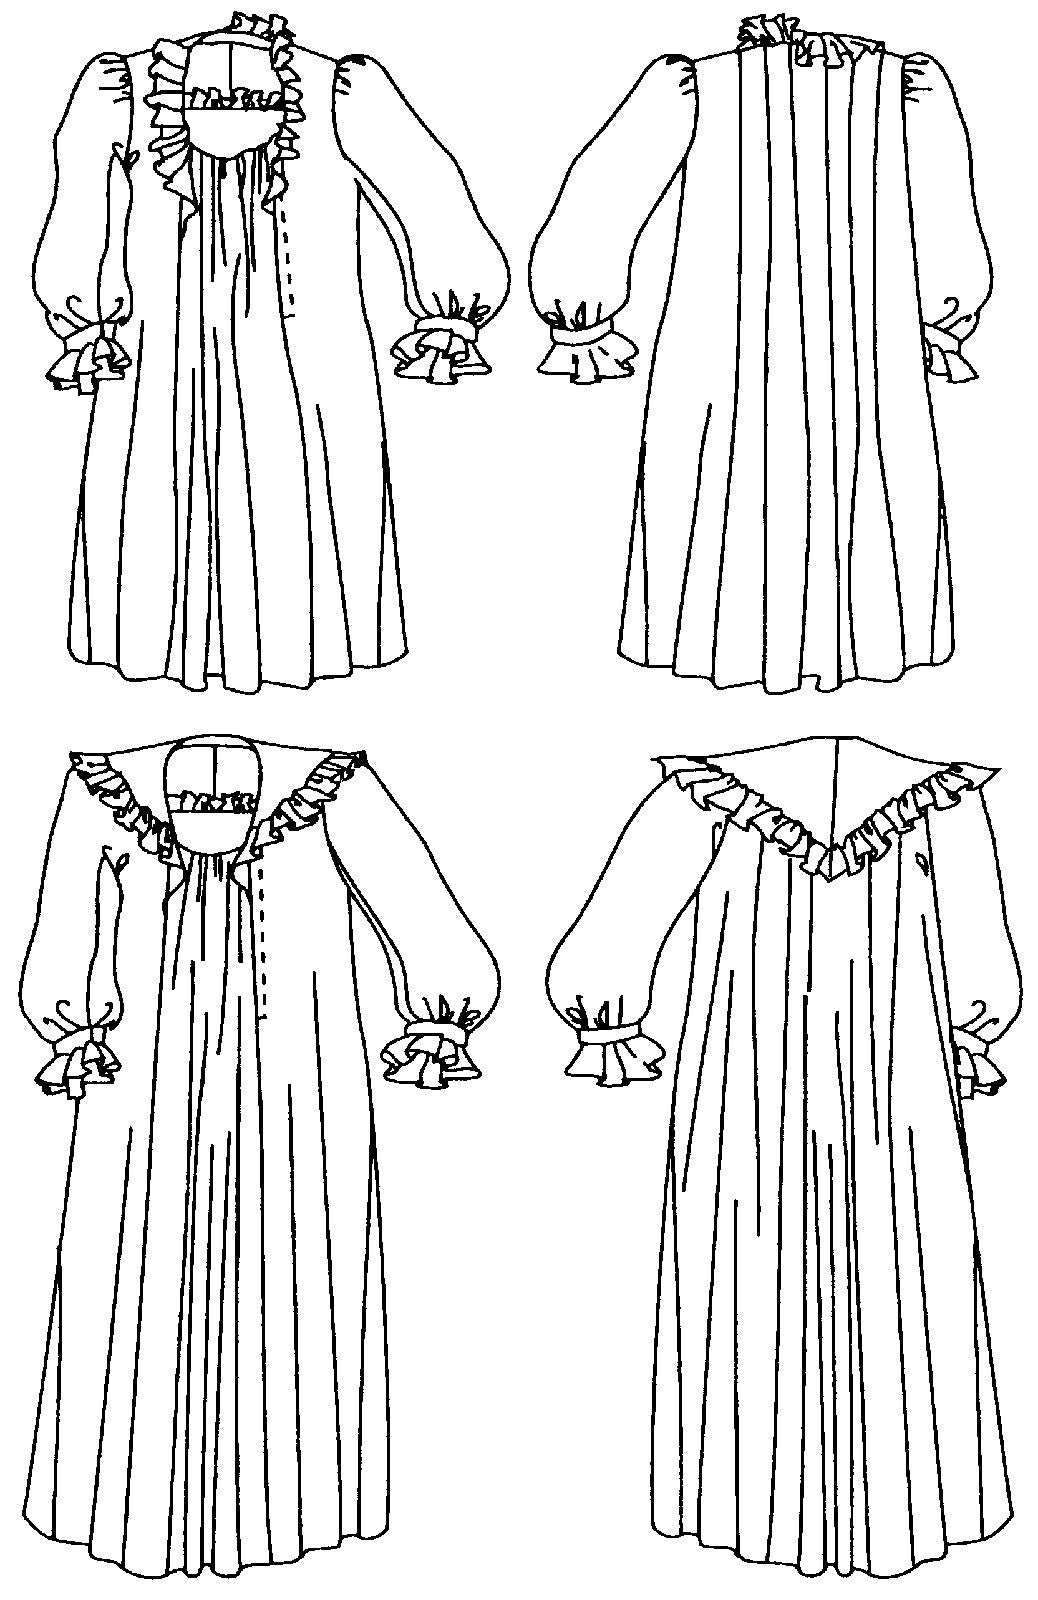 Black and white pattern flat-line drawing of front and back view of View A, and View B.